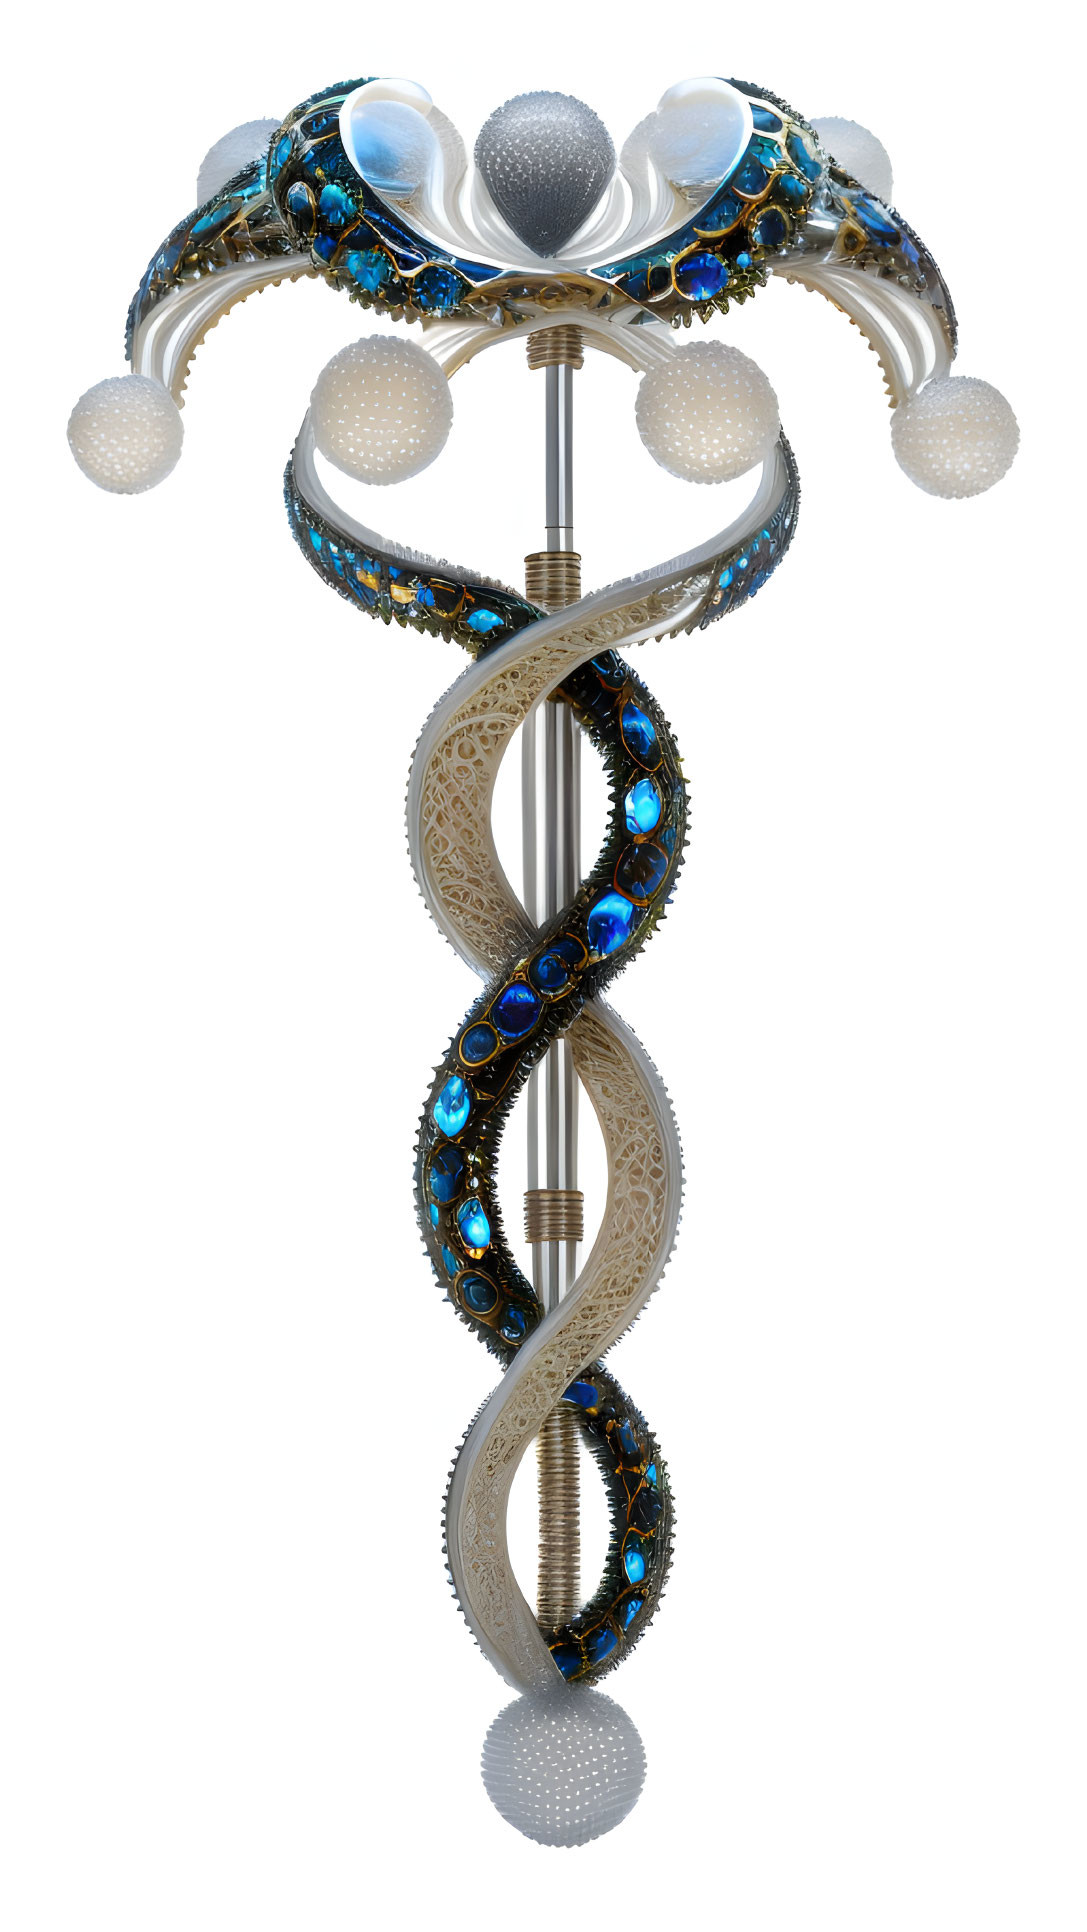 Helical DNA-inspired structure adorned with blue gems, pearls, and gold accents